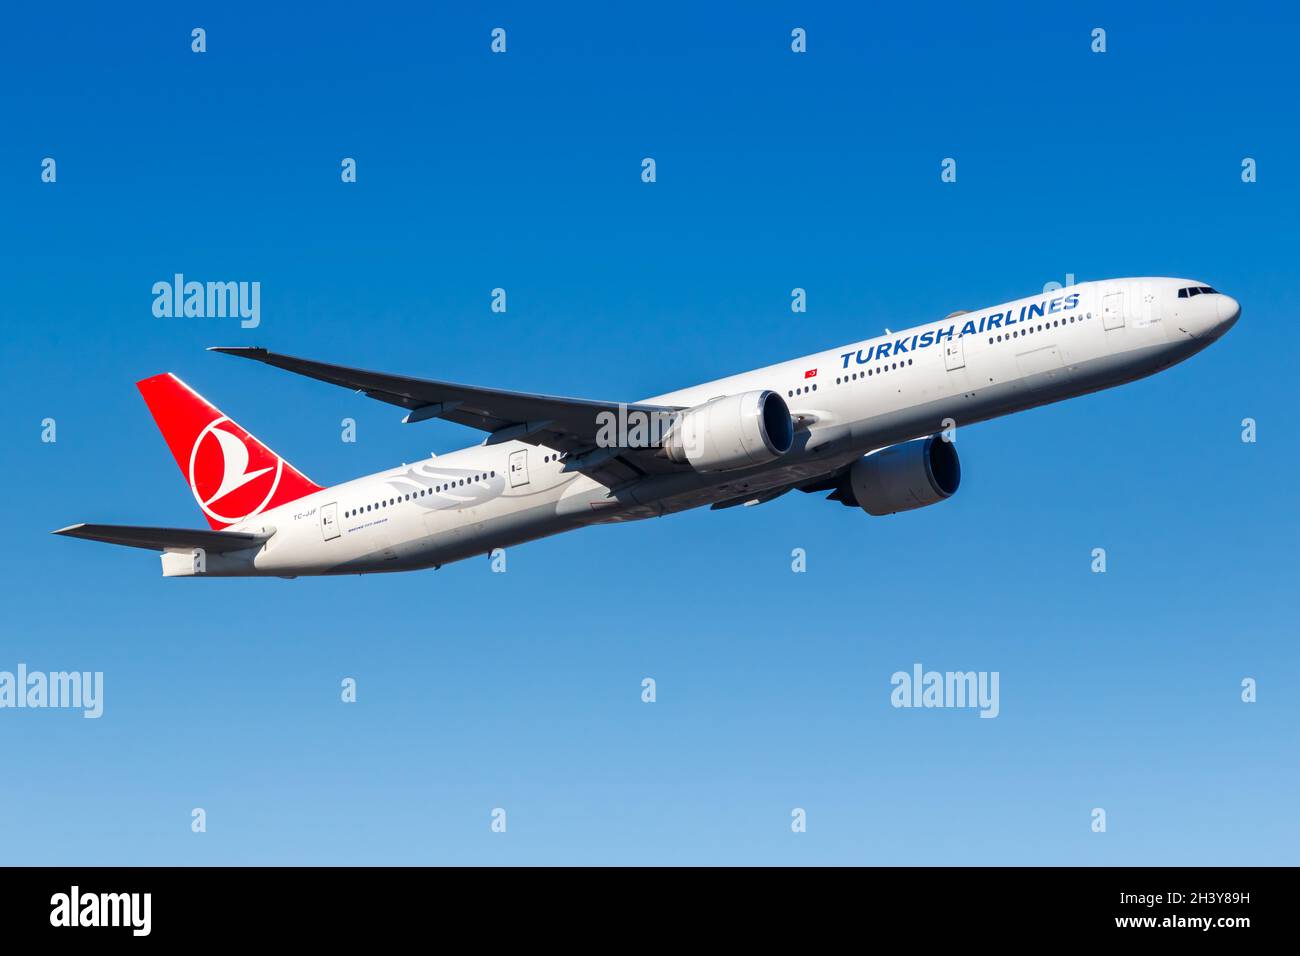 Turkish Airlines Boeing 777-300ER aircraft Frankfurt Airport in Germany Stock Photo